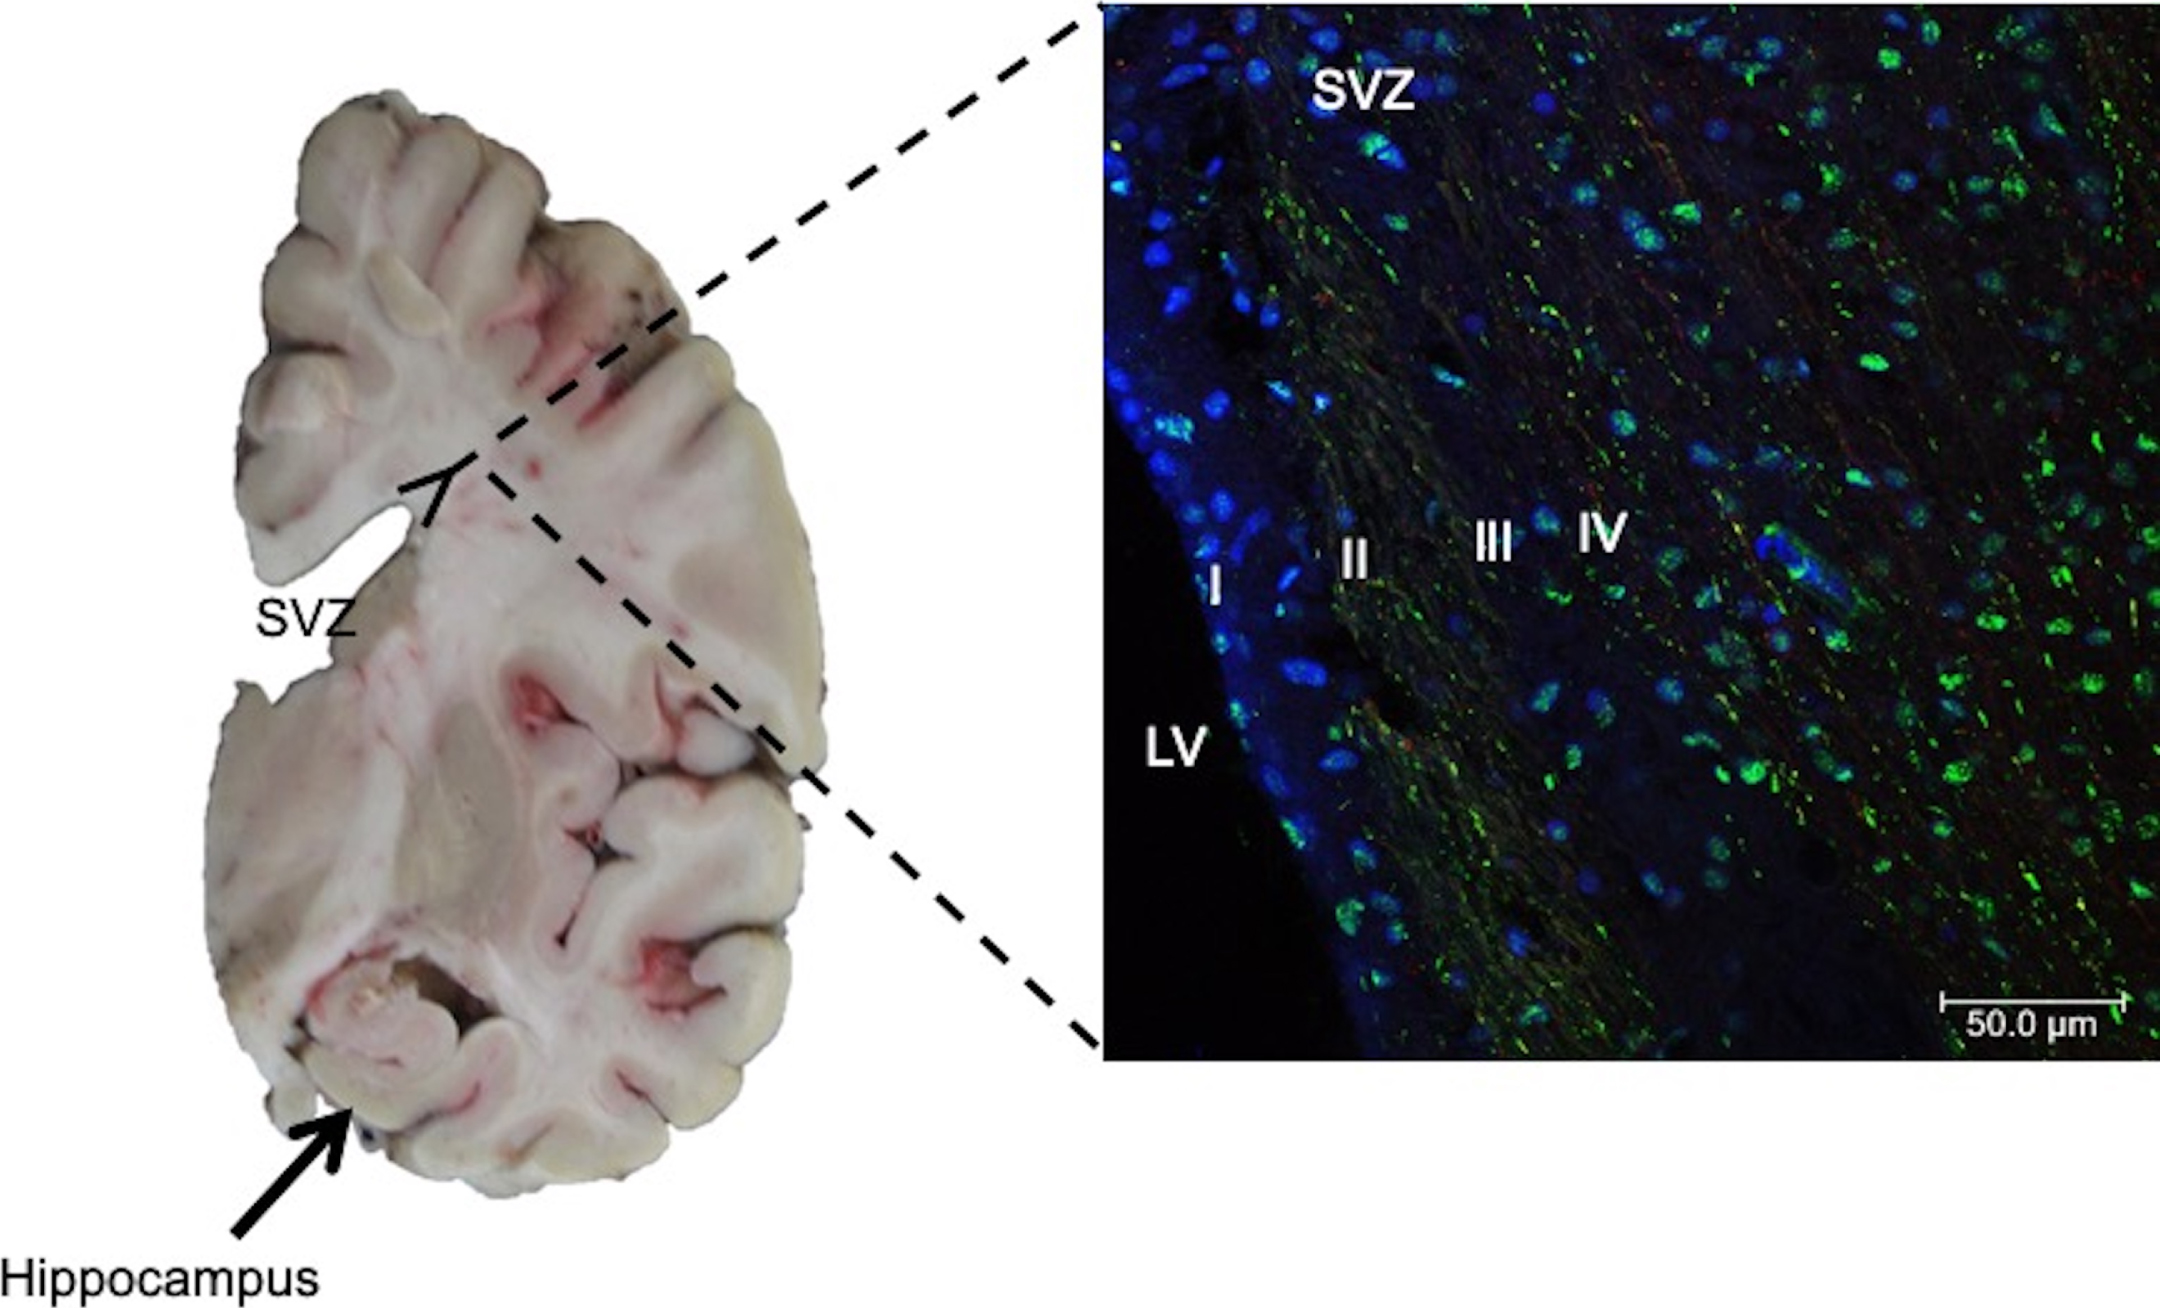 Left. Coronal section of human brain. Neural stem cells in the subgranular zone of the hippocampal dentate gyrus (arrows) and subventricular zone (SVZ), lining the walls of the lateral ventricles (LV), have been reported. Right. Immunofluorescent staining of SVZ in AD brain. Antibody against phospho-tau protein and counterstaining with To-Pro Iodide was used to reveal nuclei. Four layers in the SVZ are observed: I) ependymal layer, II) hypocellular gap, III) astrocytic ribbon layer, and IV) transitional zone. Staining for phospho-tau protein showed dense labeling of speckles associated with nuclei.